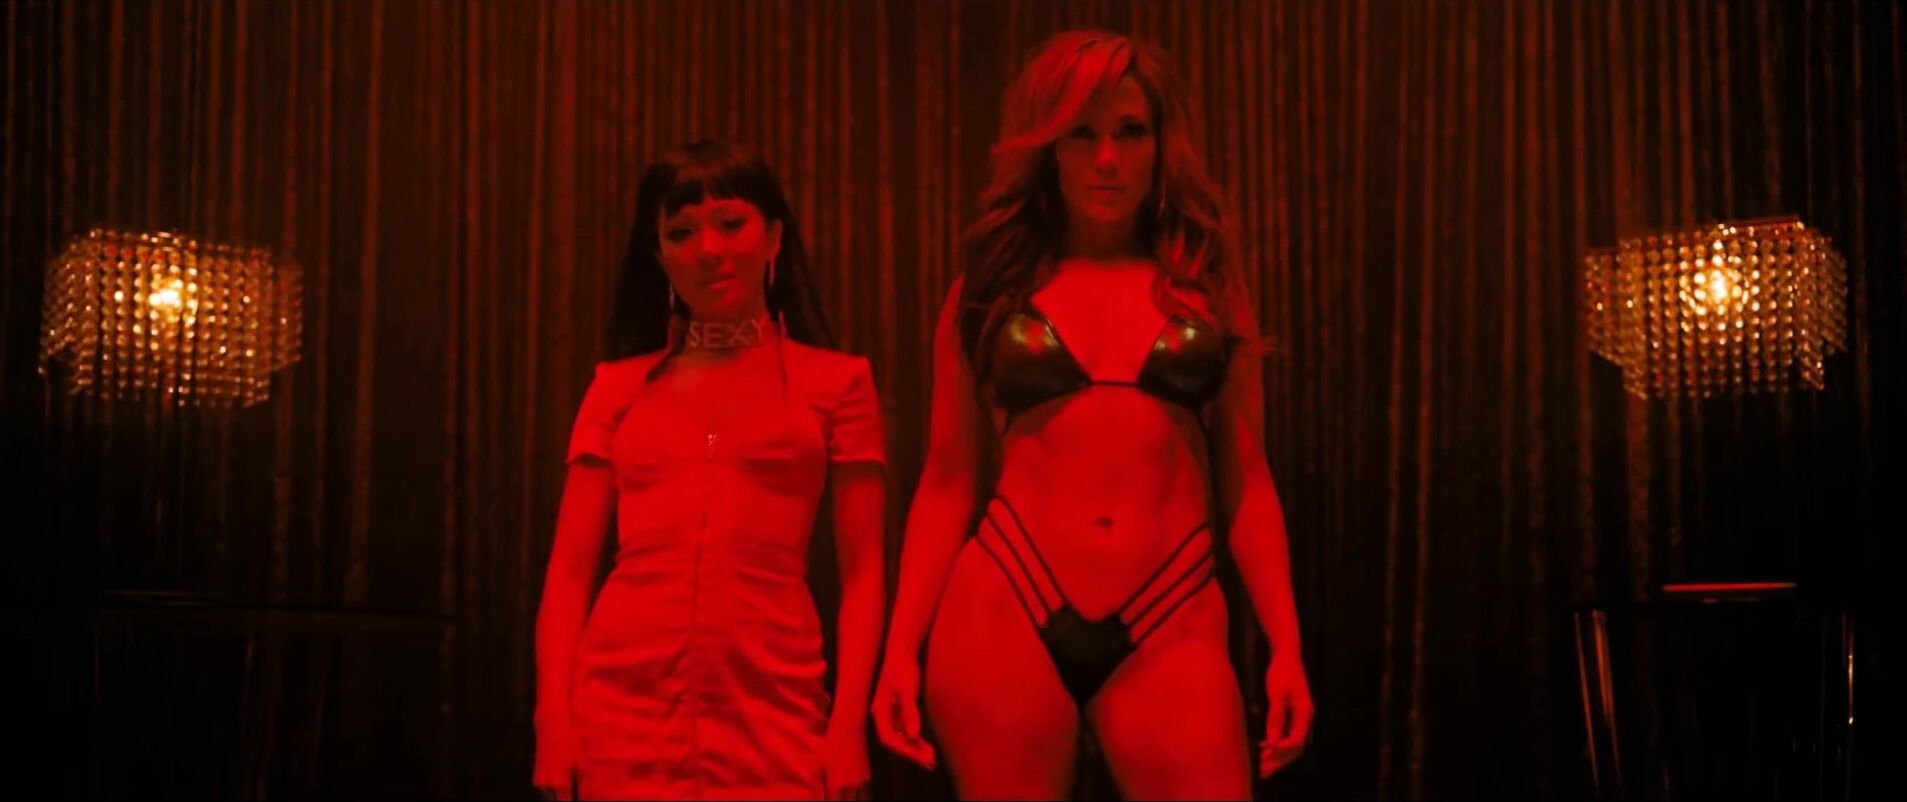 Officesex Hot Latina and Eastern strippers Jennifer Lopez and Constance Wu nude in Hustlers (2019) Style - 1